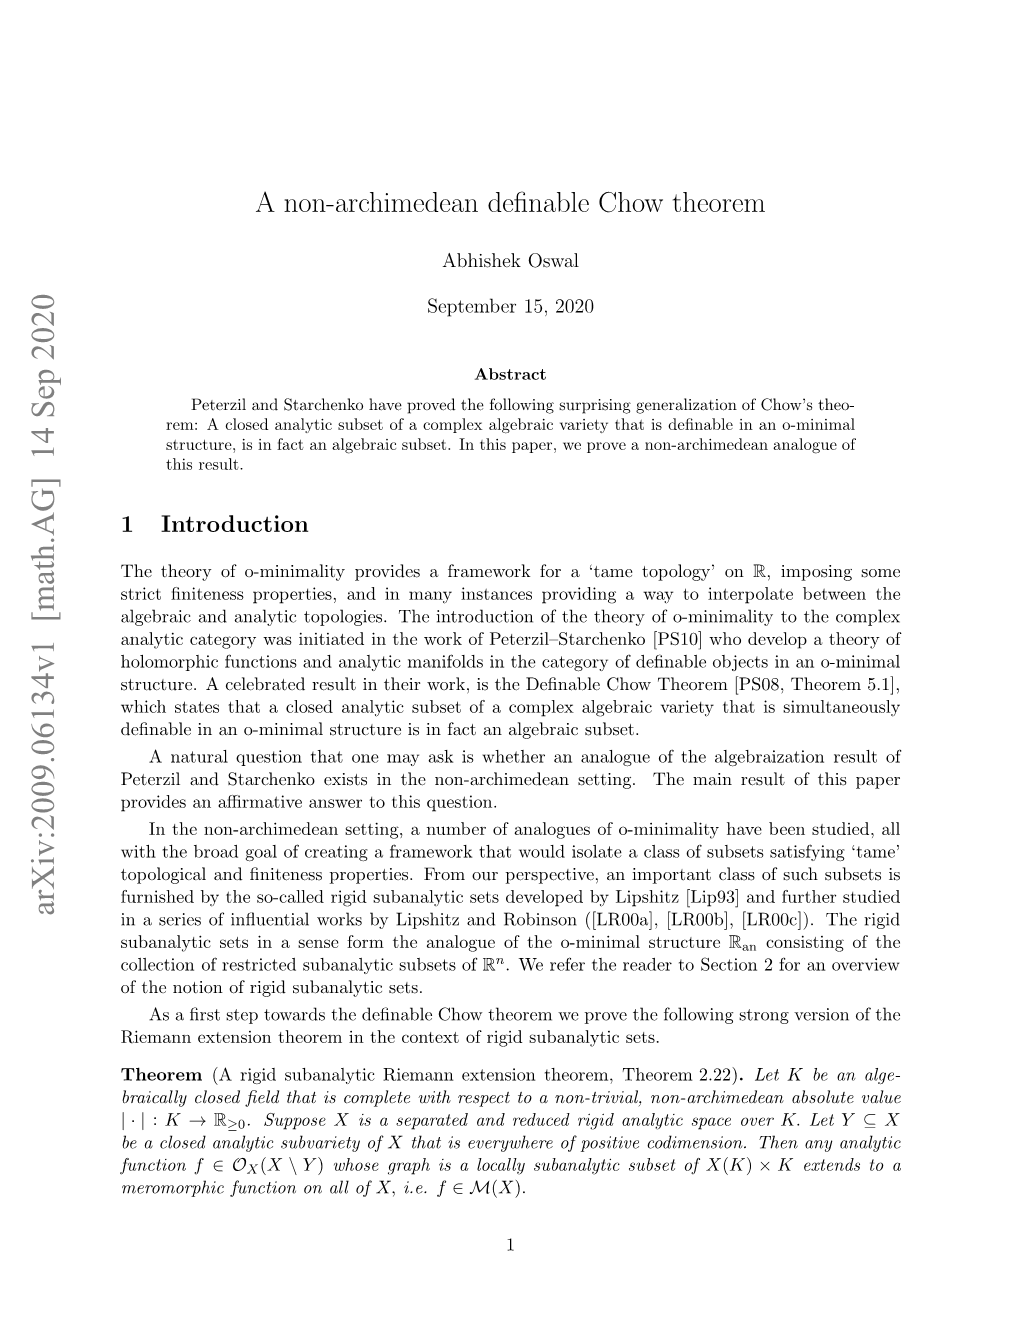 A Non-Archimedean Definable Chow Theorem